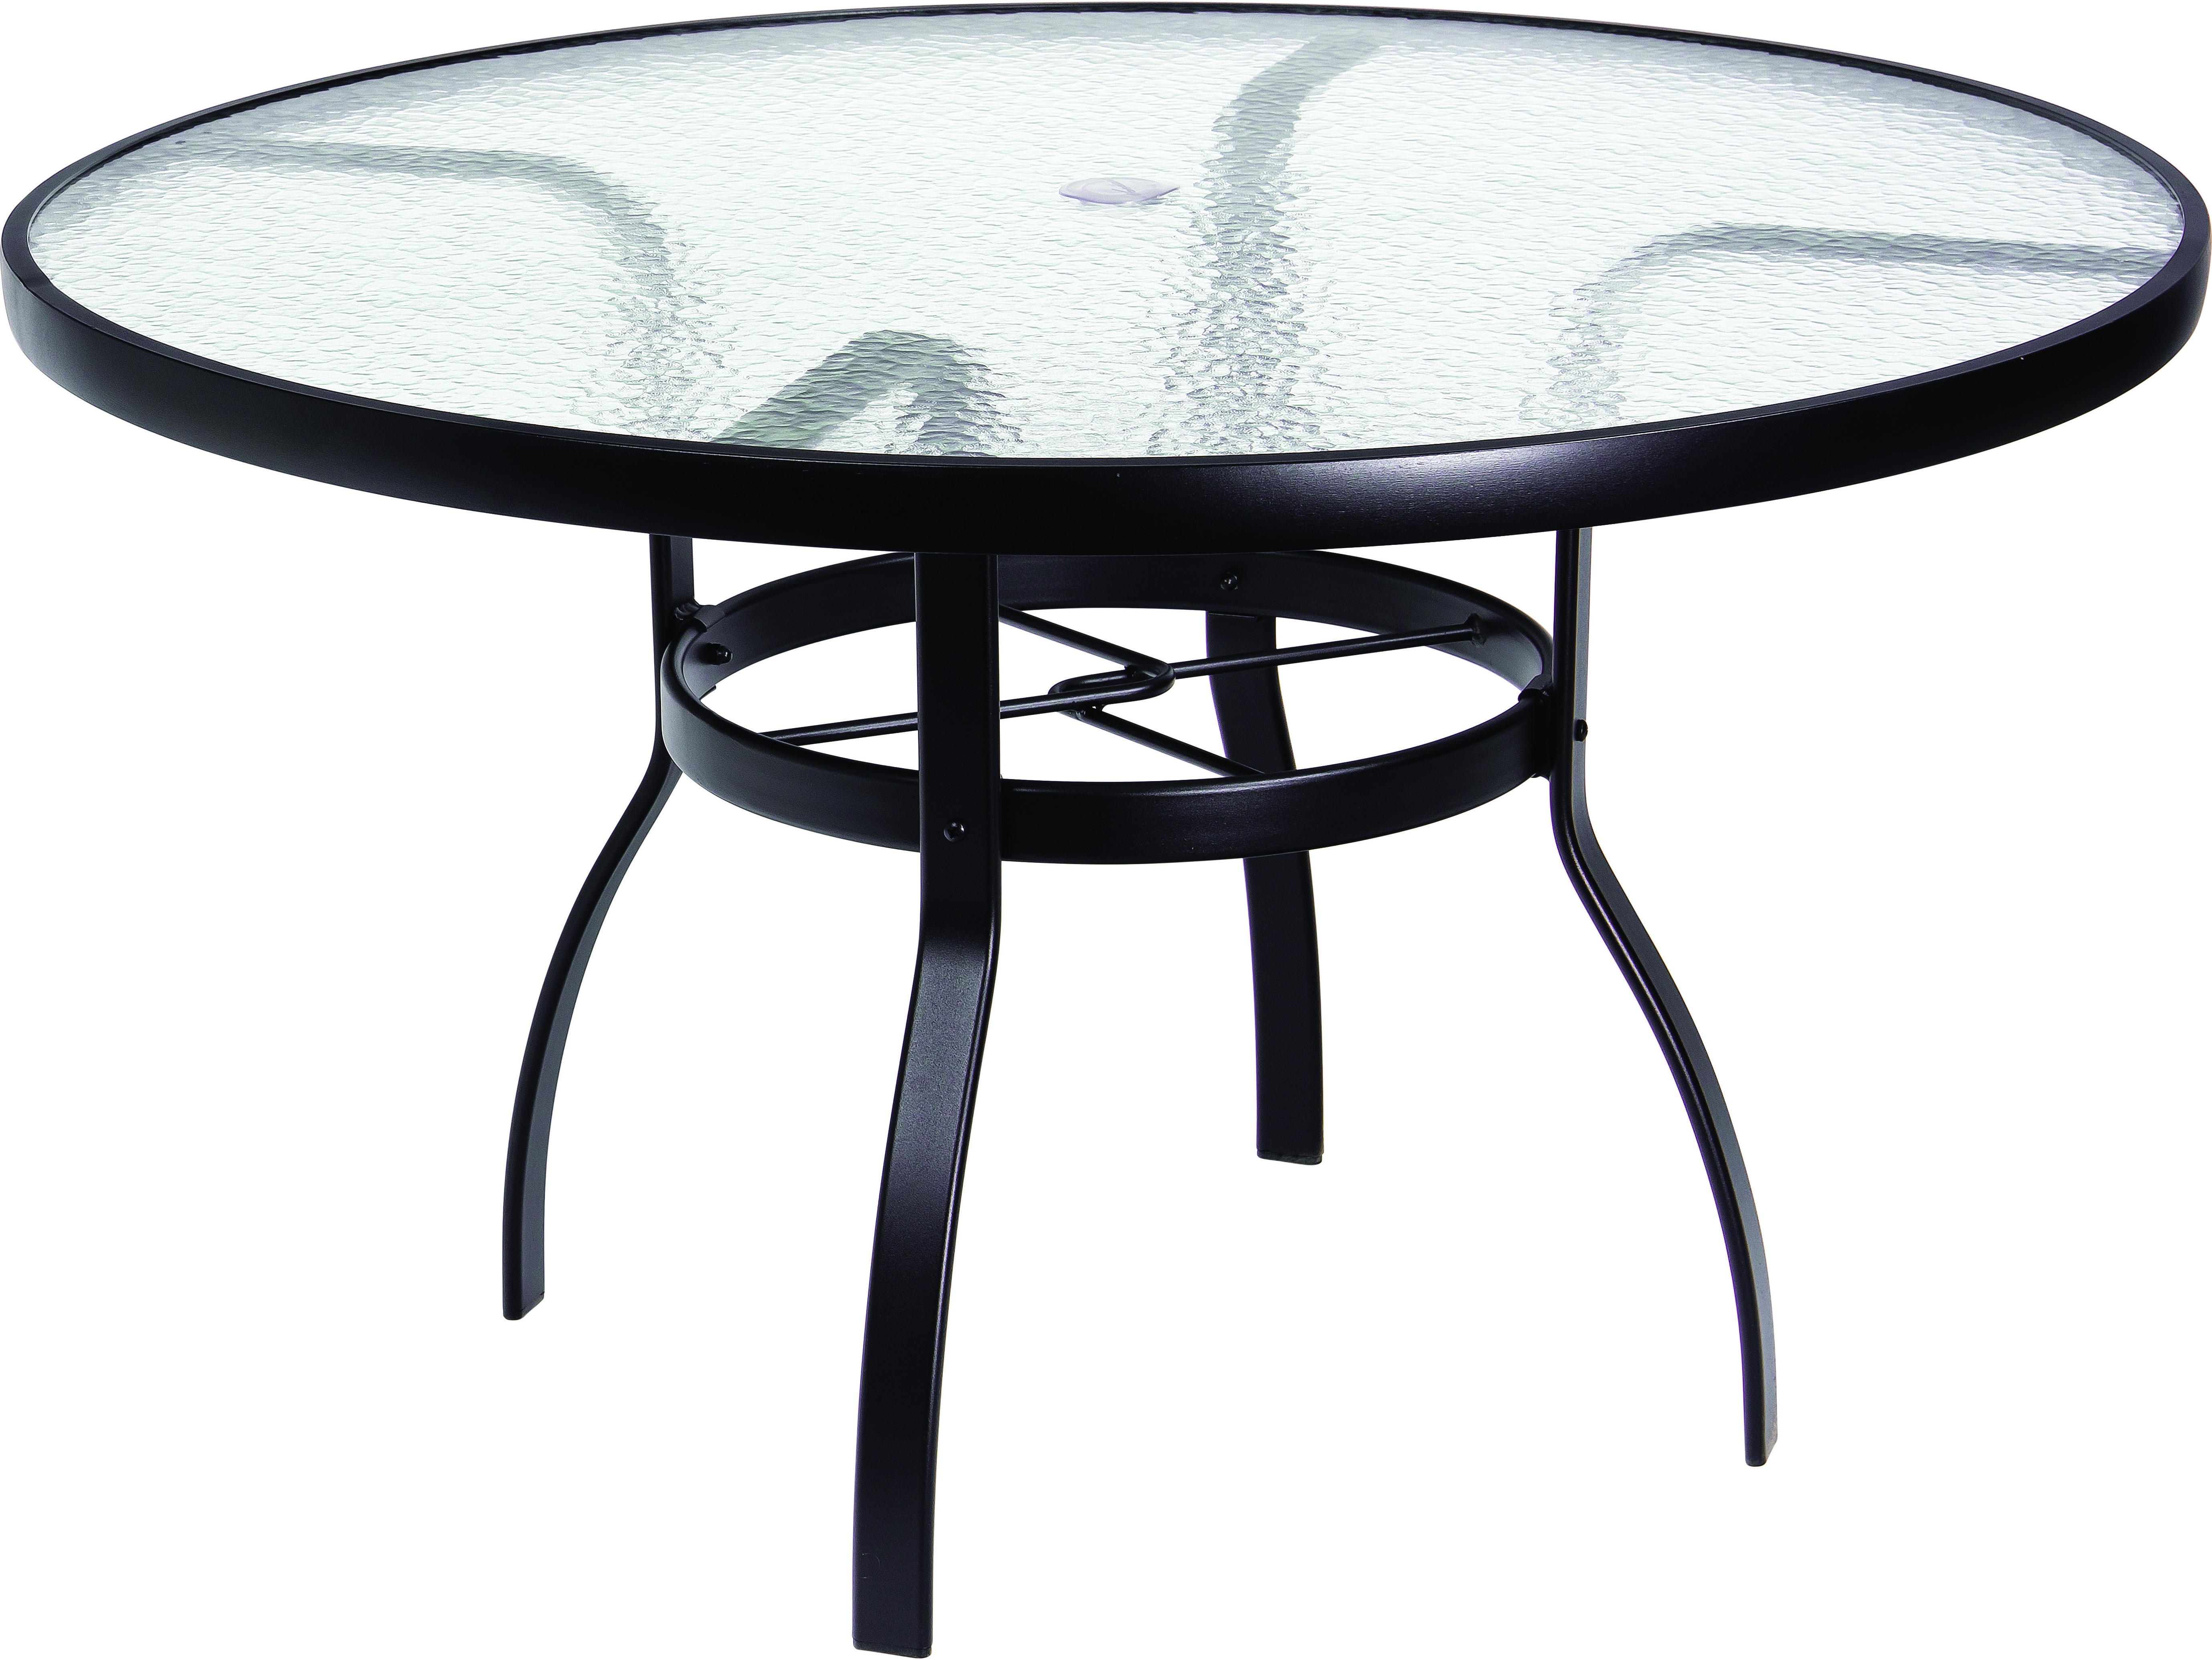 Round Acrylic Top Dining Table, Round Acrylic Table Top